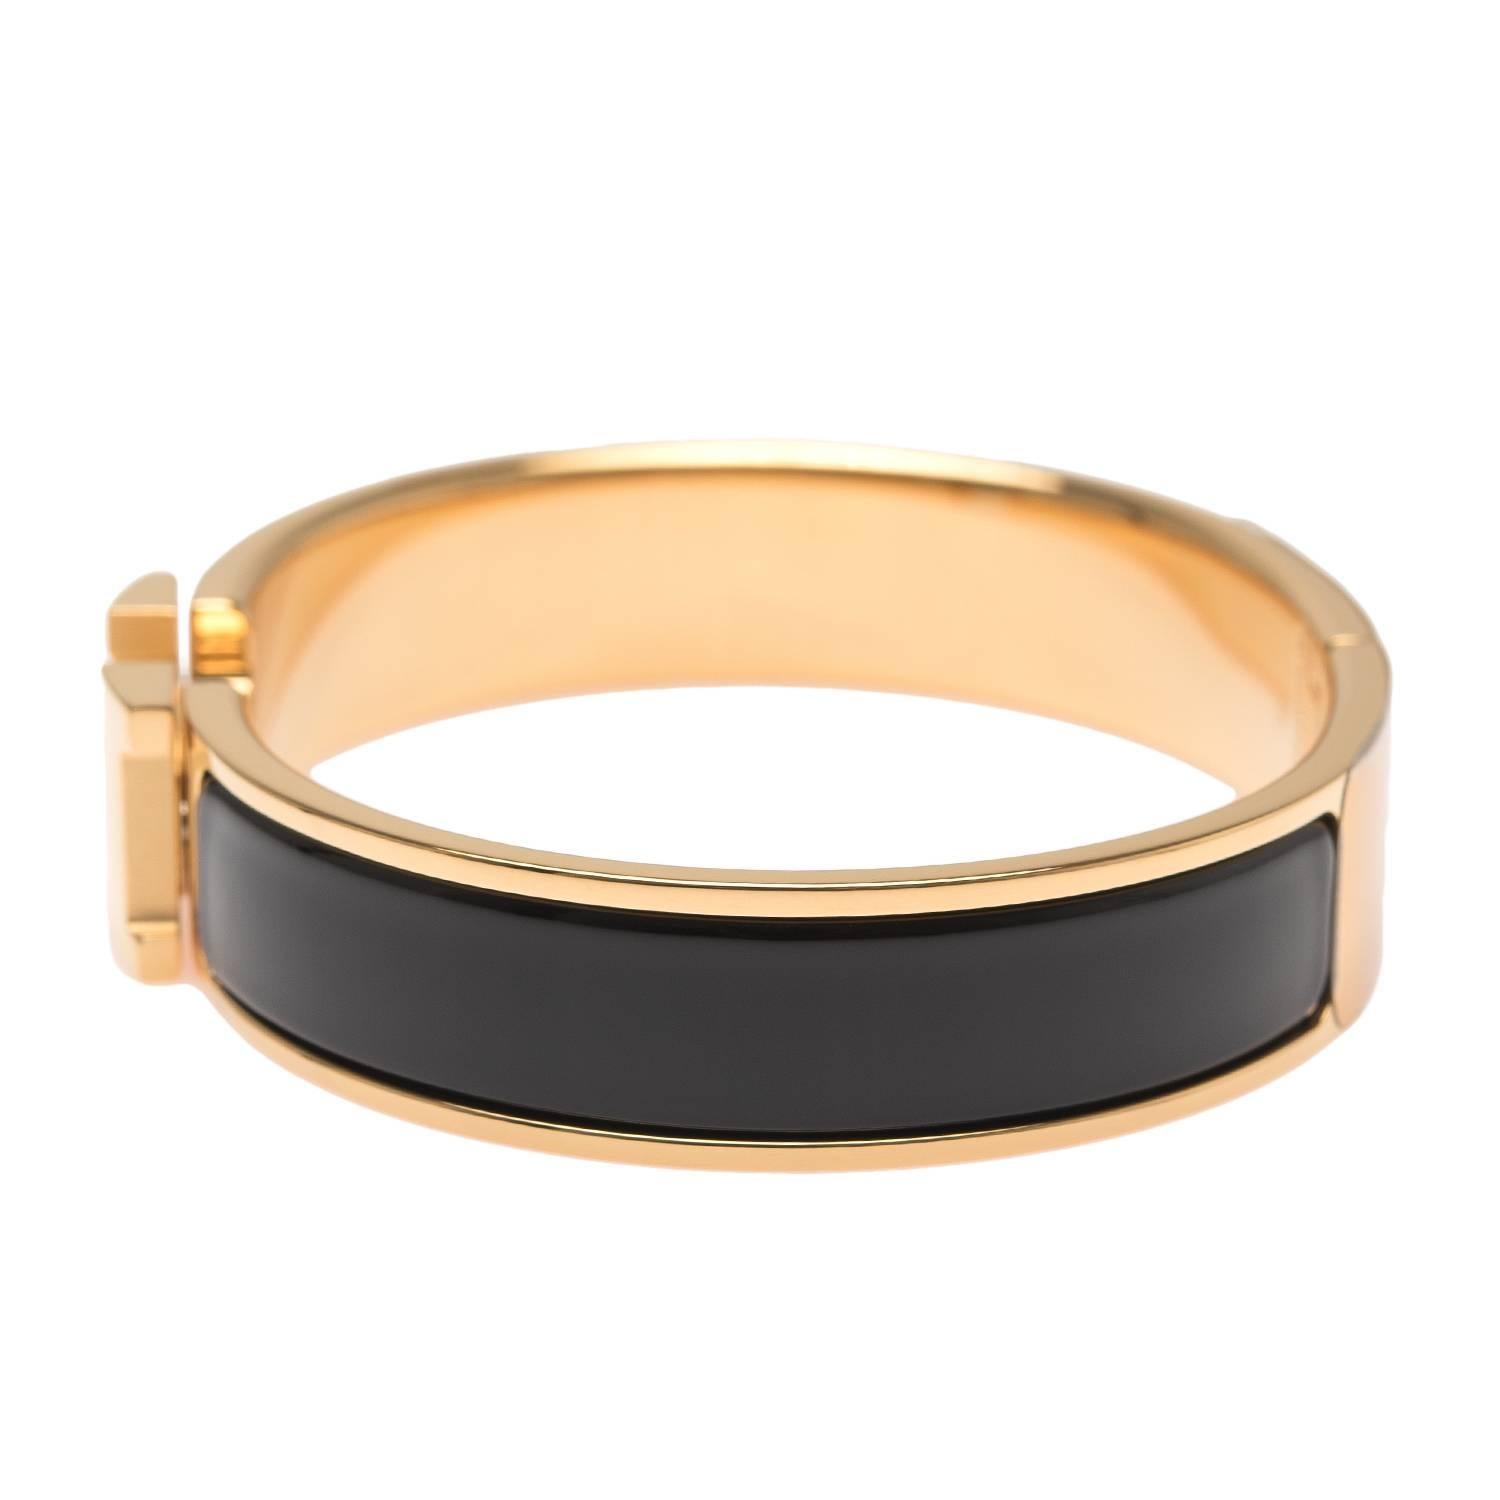 Hermes narrow Clic Clac H bracelet in Black enamel with gold plated hardware in size PM.

Origin: France

Condition: Pristine; plastic on hardware

Accompanied by: Hermes box, dustbag, carebook and ribbon

Measurements: Diameter: 2.25";